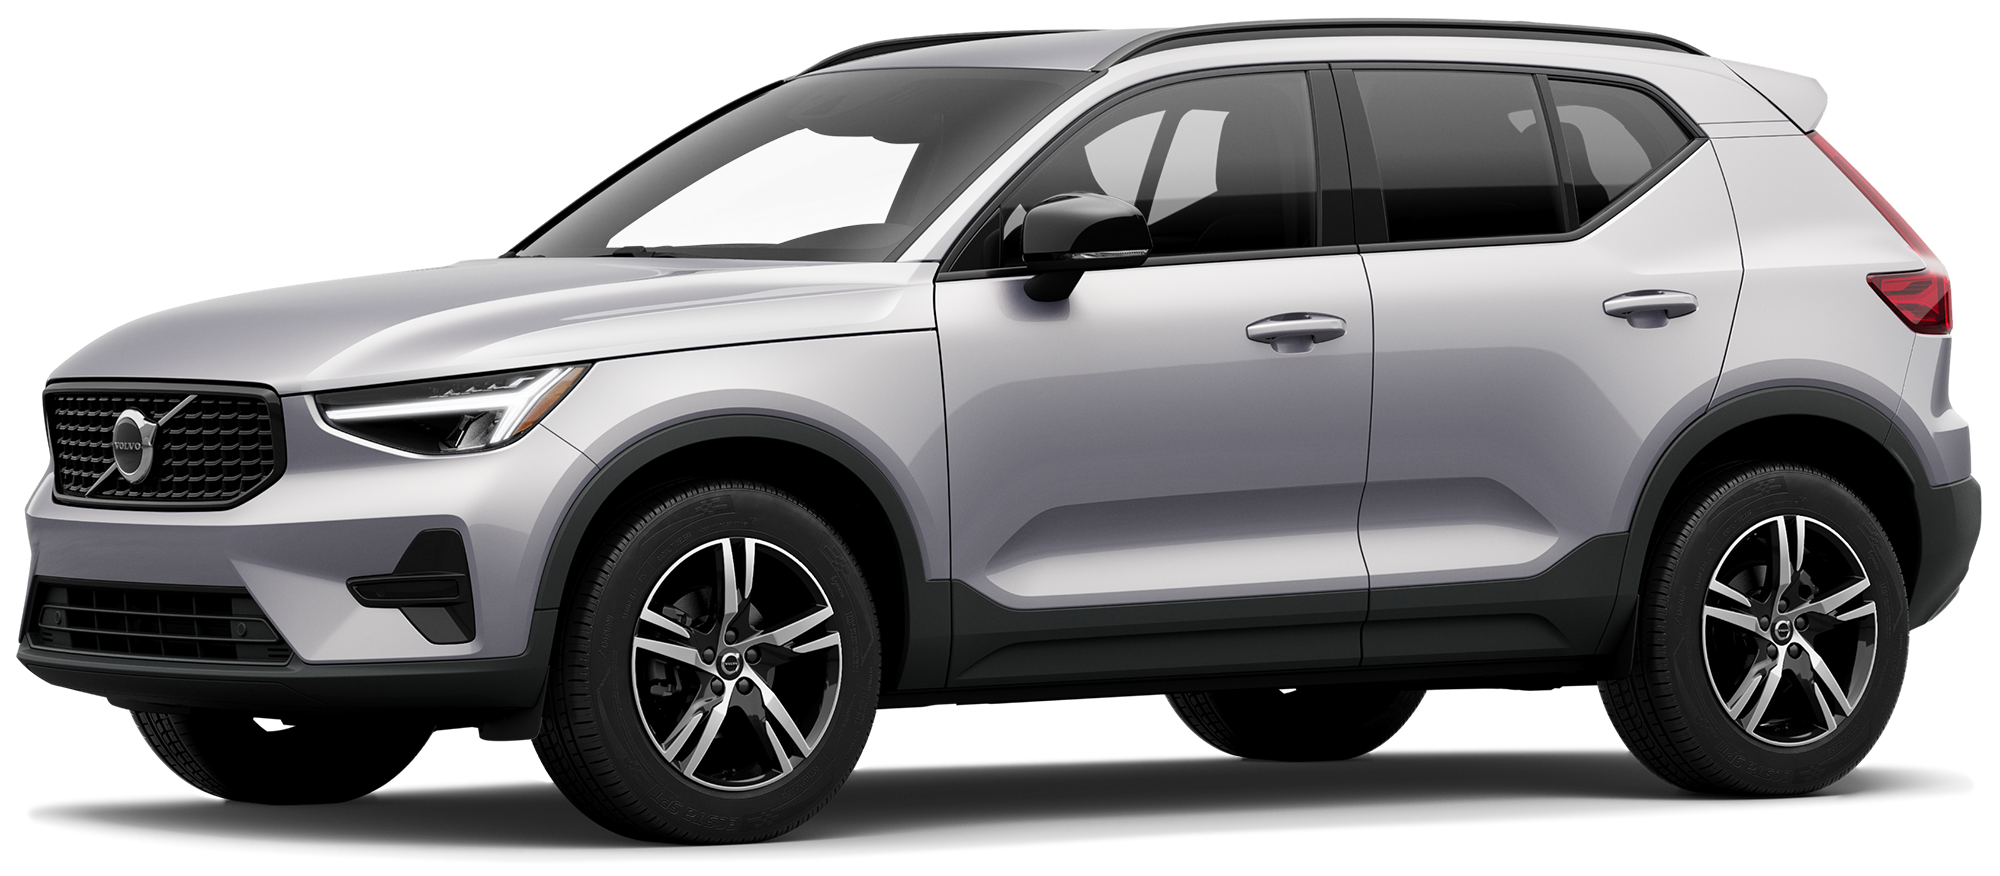 Volvo Incentives Rebates Specials In Grapevine TX Volvo Finance And Lease Deals Grubbs